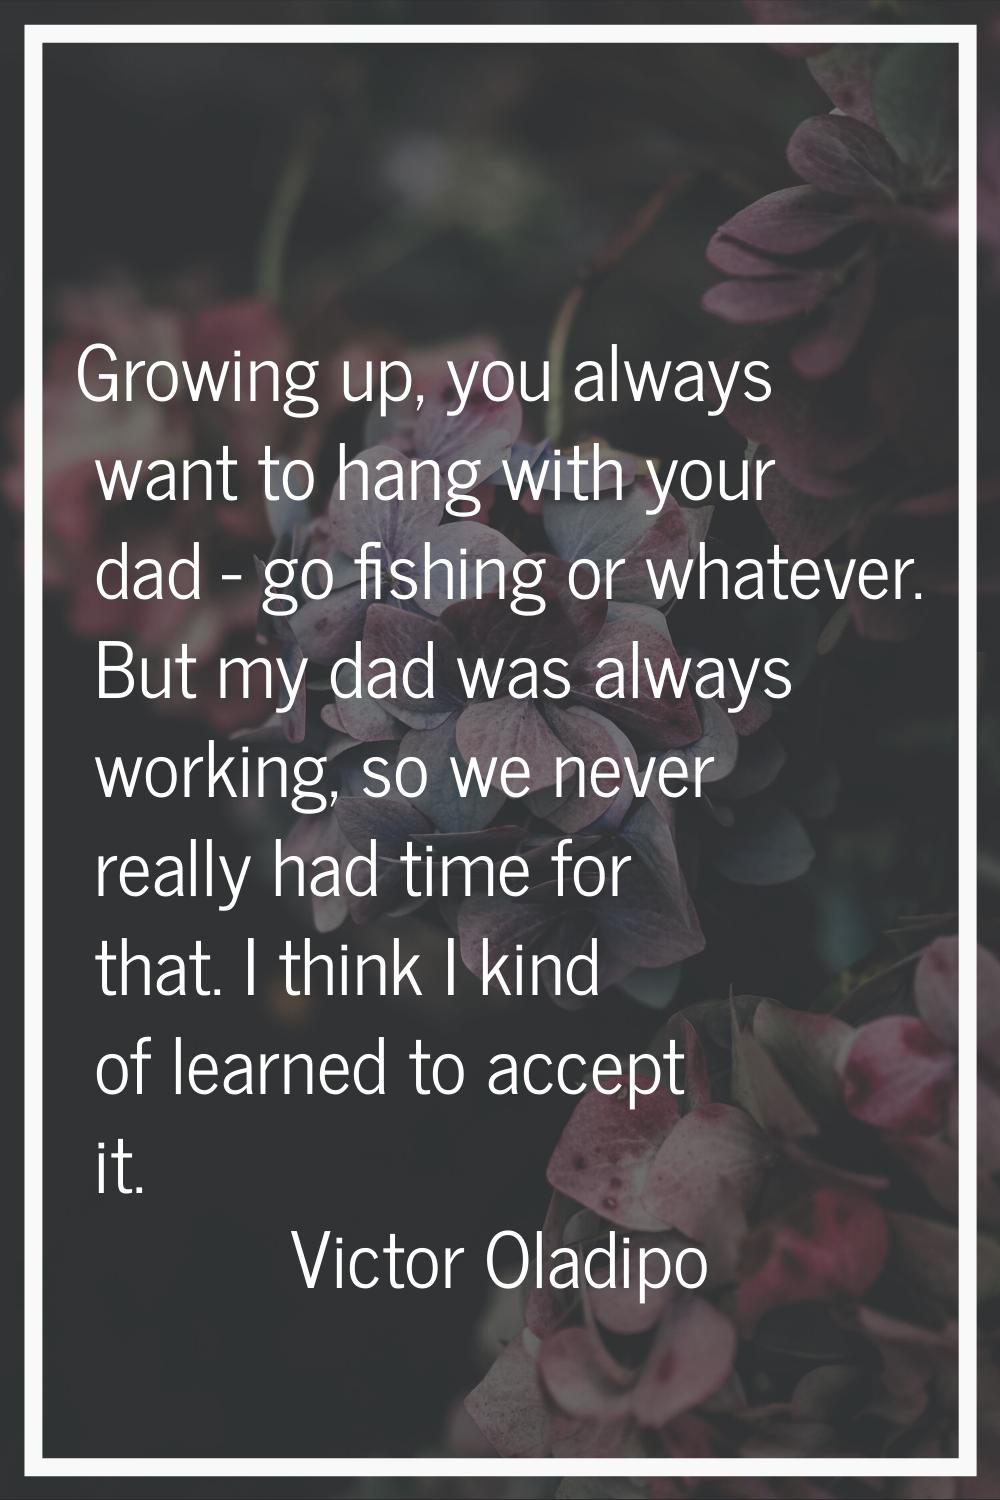 Growing up, you always want to hang with your dad - go fishing or whatever. But my dad was always w